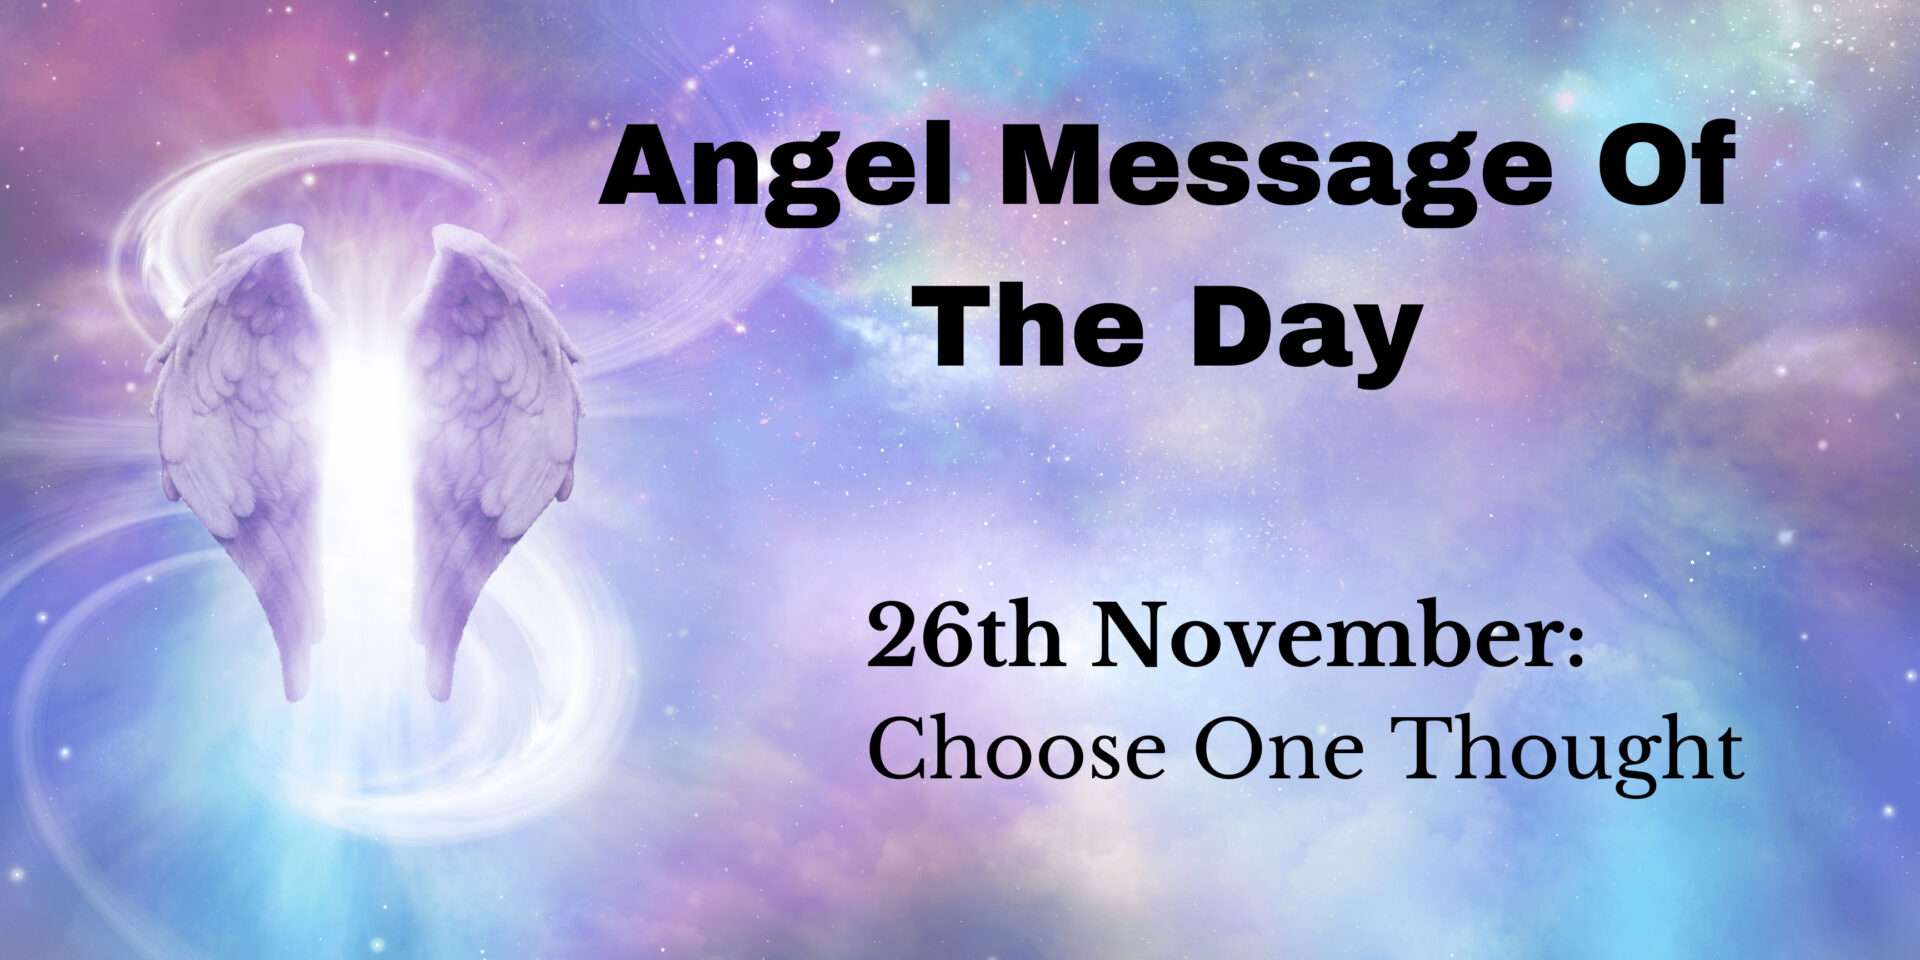 angel message of the day : choose one thought